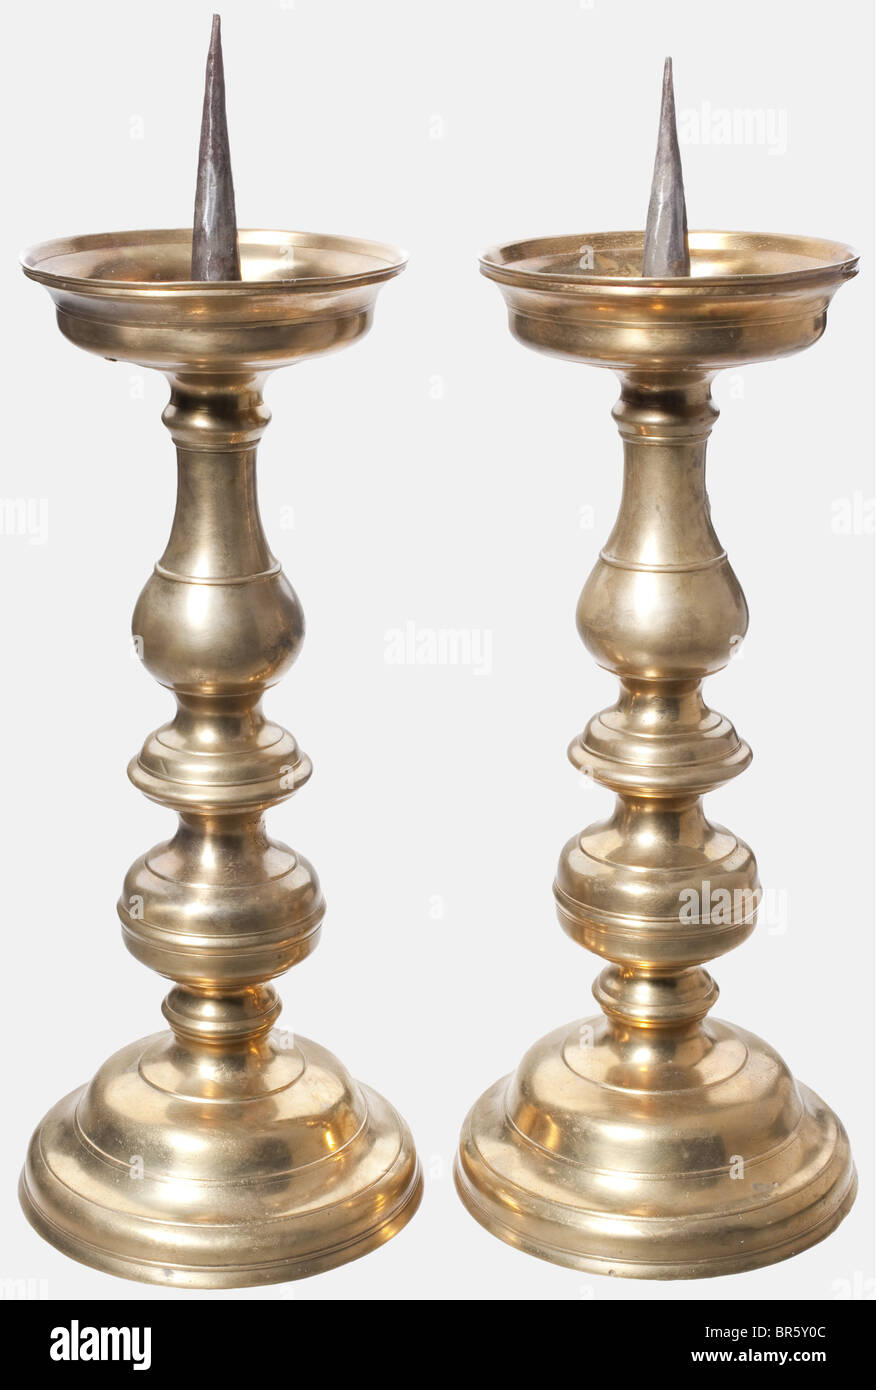 https://c8.alamy.com/comp/BR5Y0C/a-pair-of-large-german-pricket-candlesticks-circa-1600-brass-candle-BR5Y0C.jpg